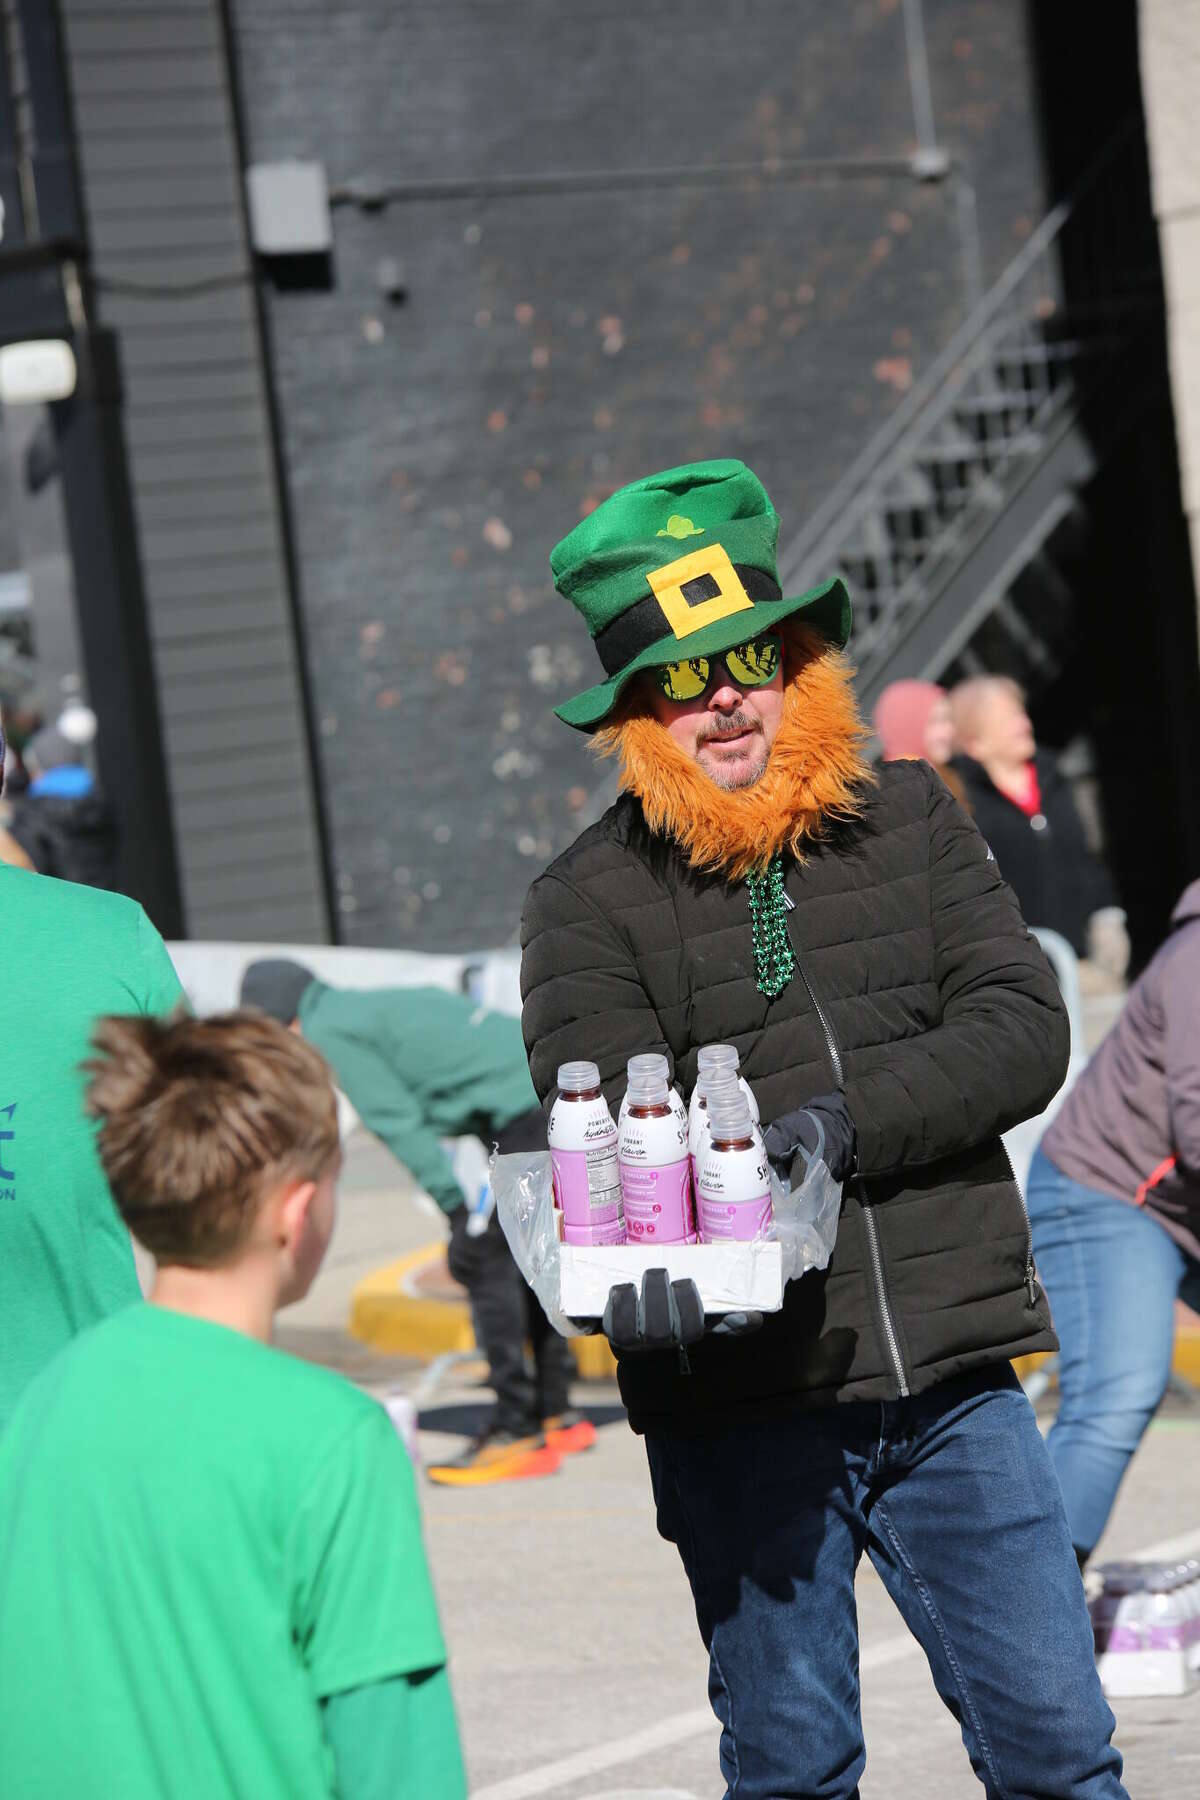 PHOTOS Thousands Participate in Bay City St. Patrick's Day 5K race